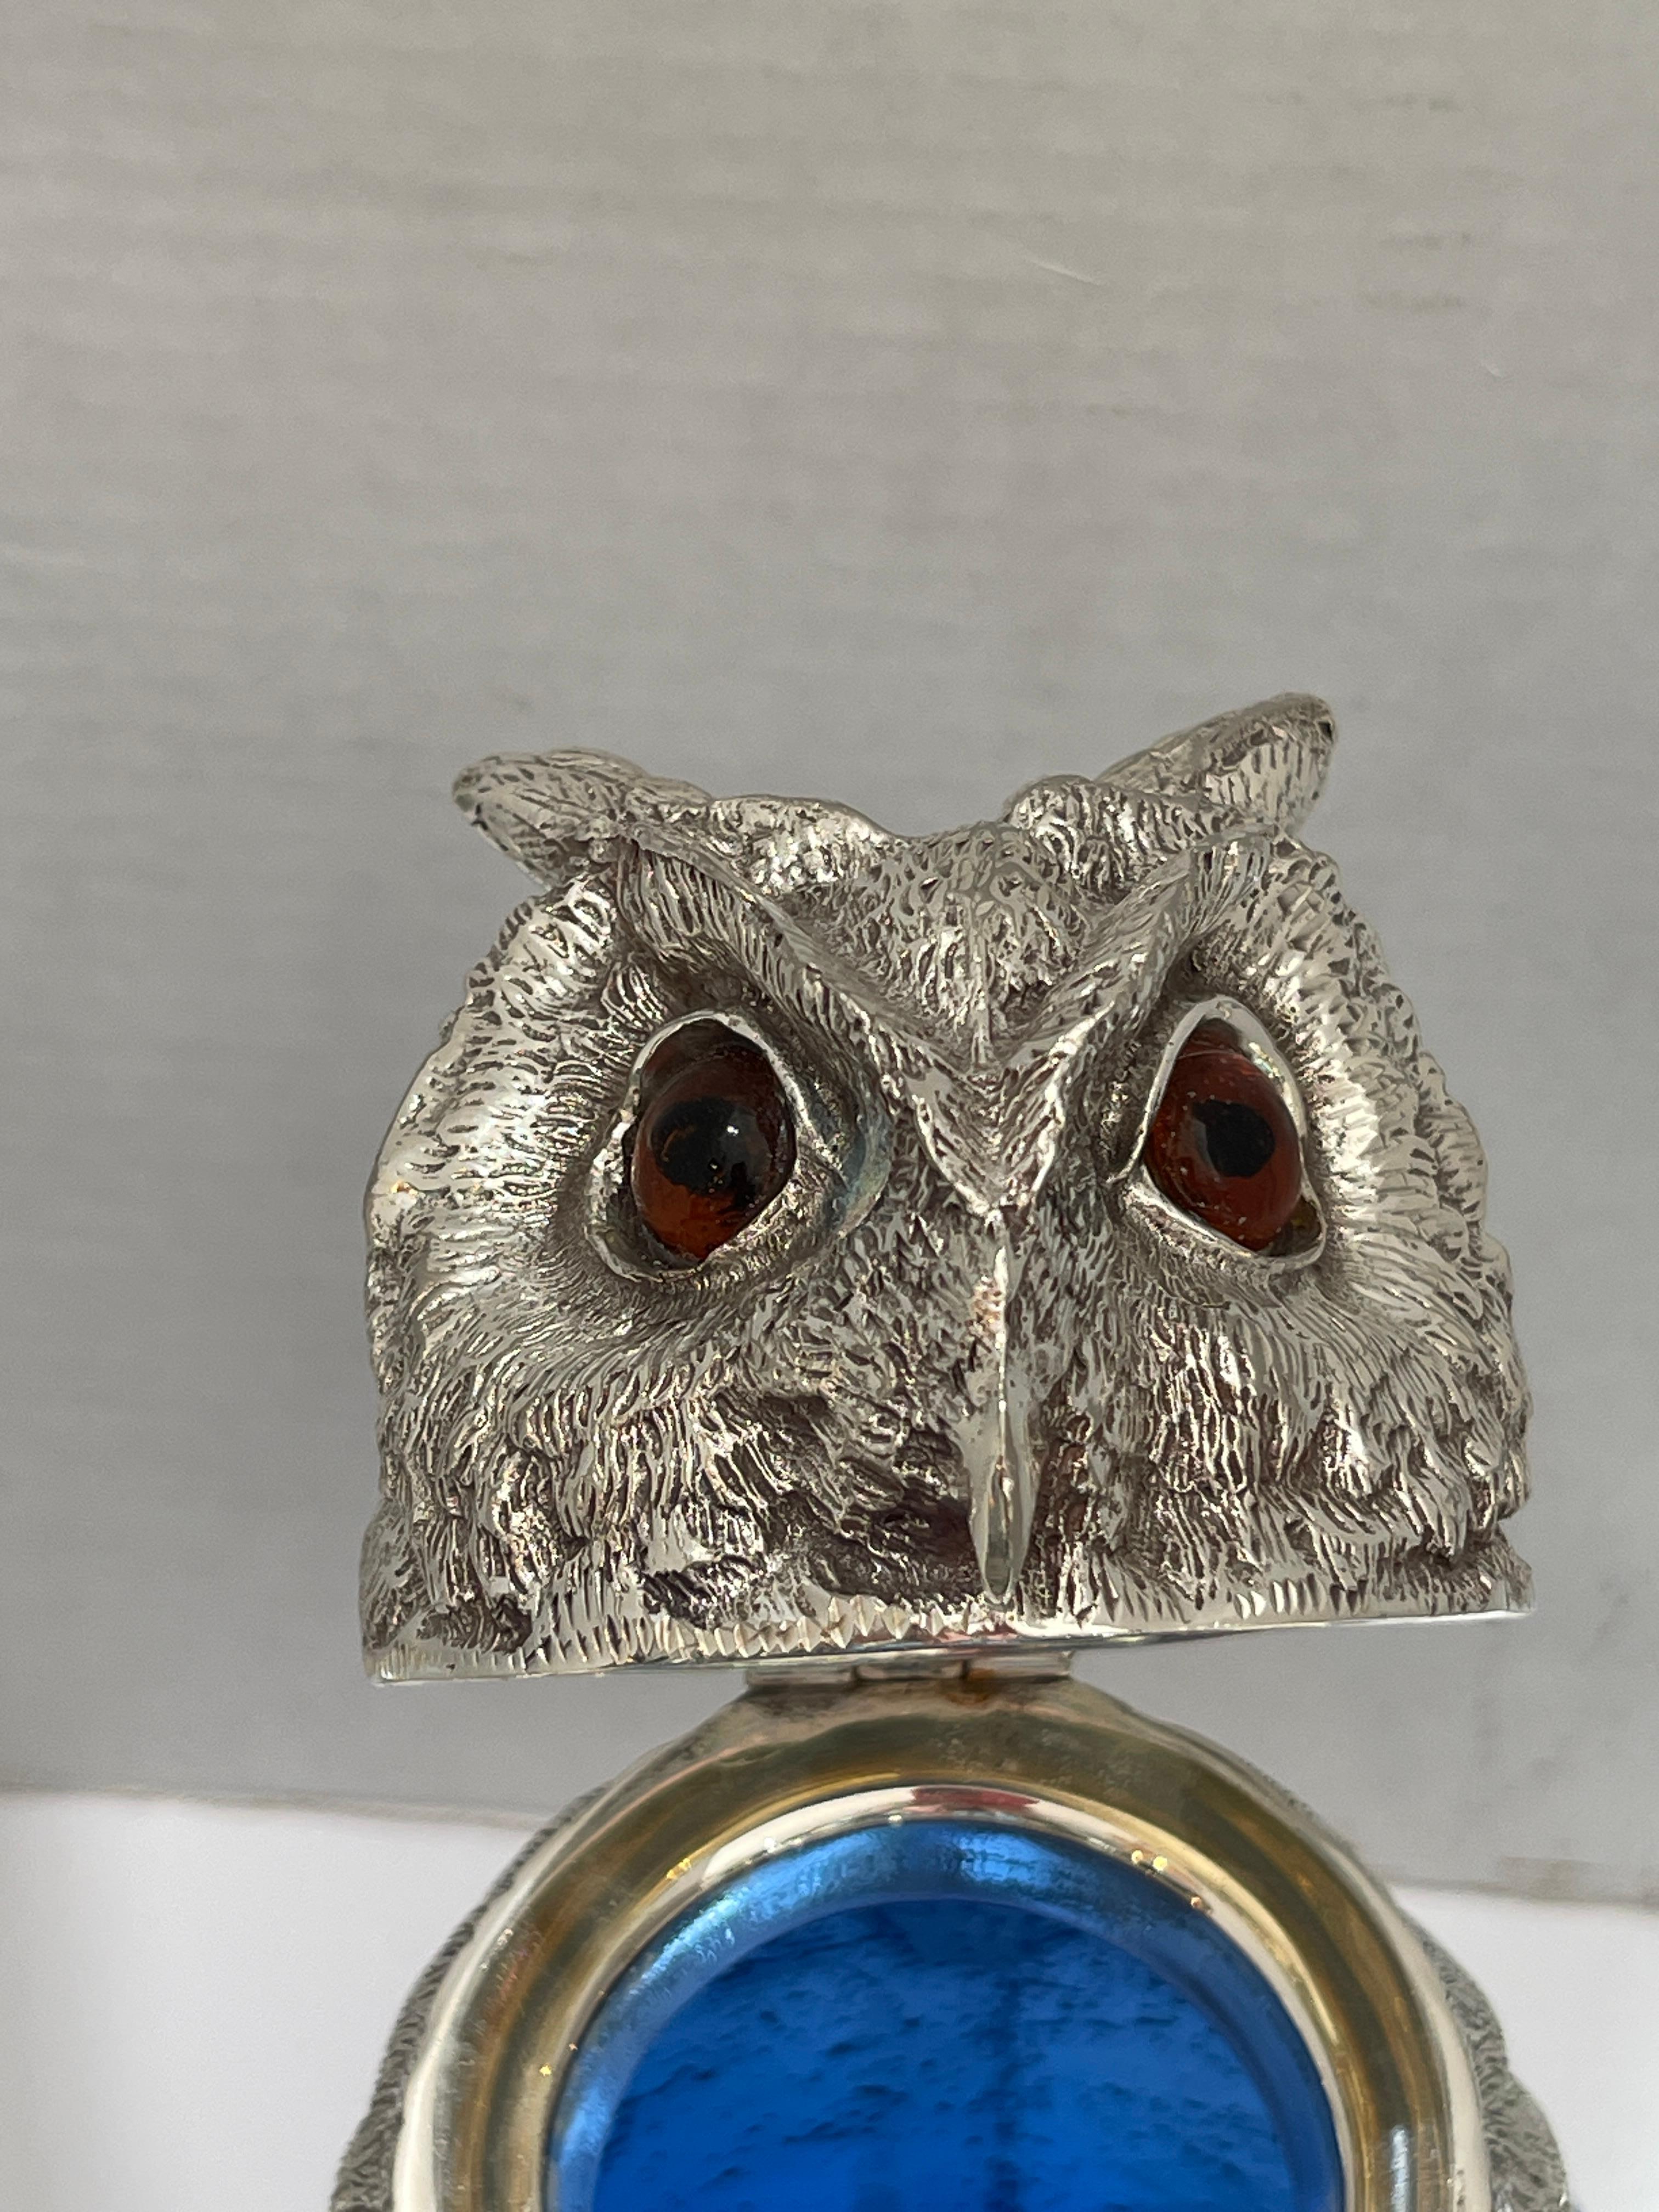 Novelty Silver Plate and Cobalt Blue Glass Owl Claret Jug Decanter 20Th C. For Sale 2